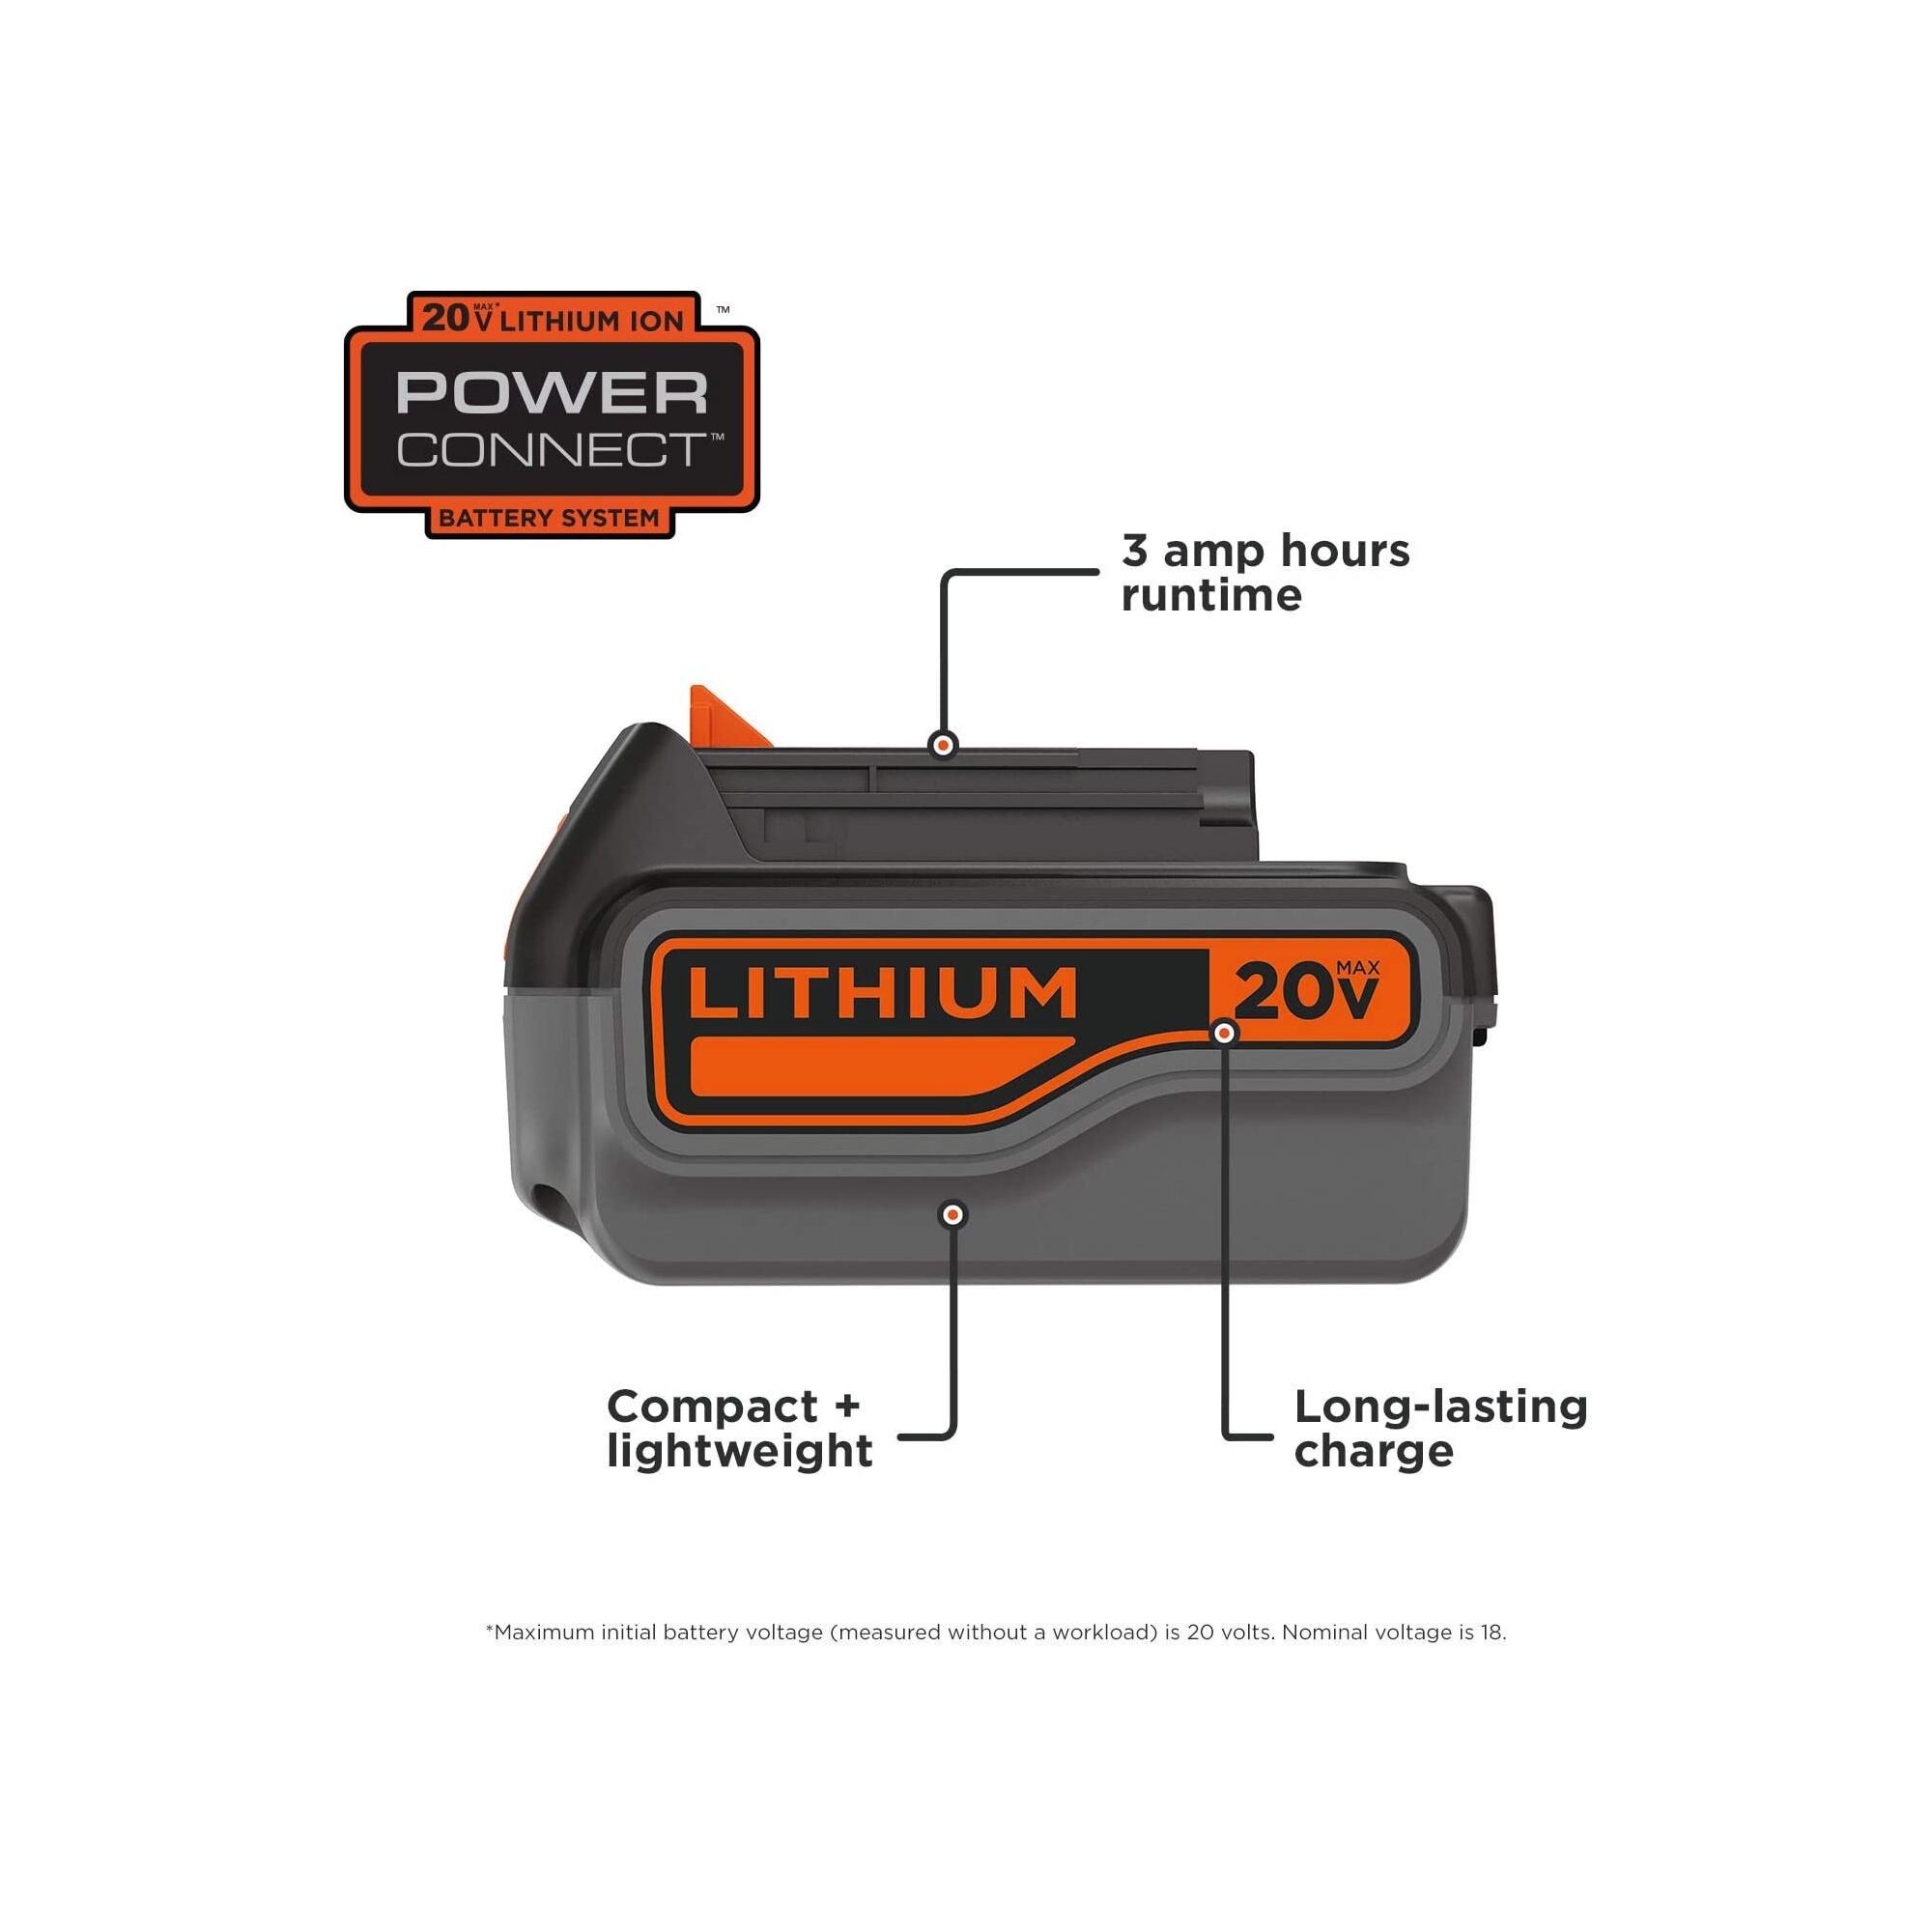 Graphic detailing key features of the 20V battery